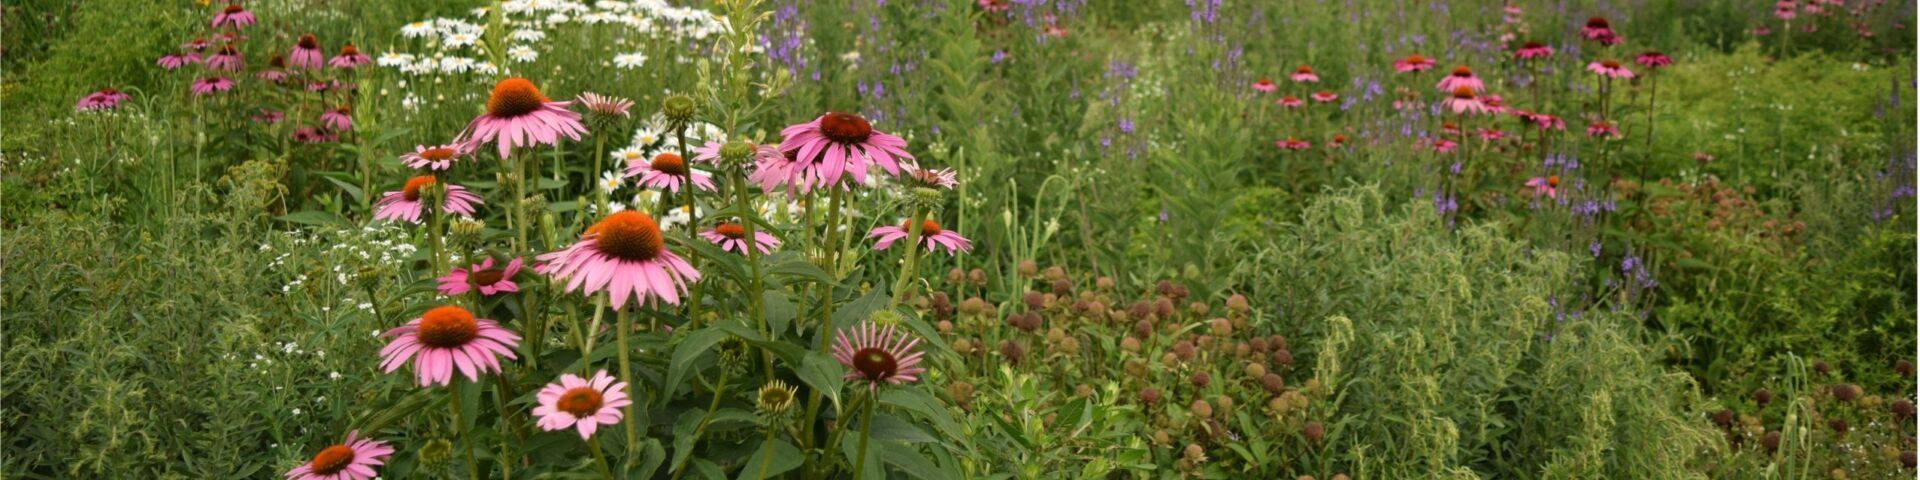 Photo of a meadow with coneflowers and other native flowers in bloom.